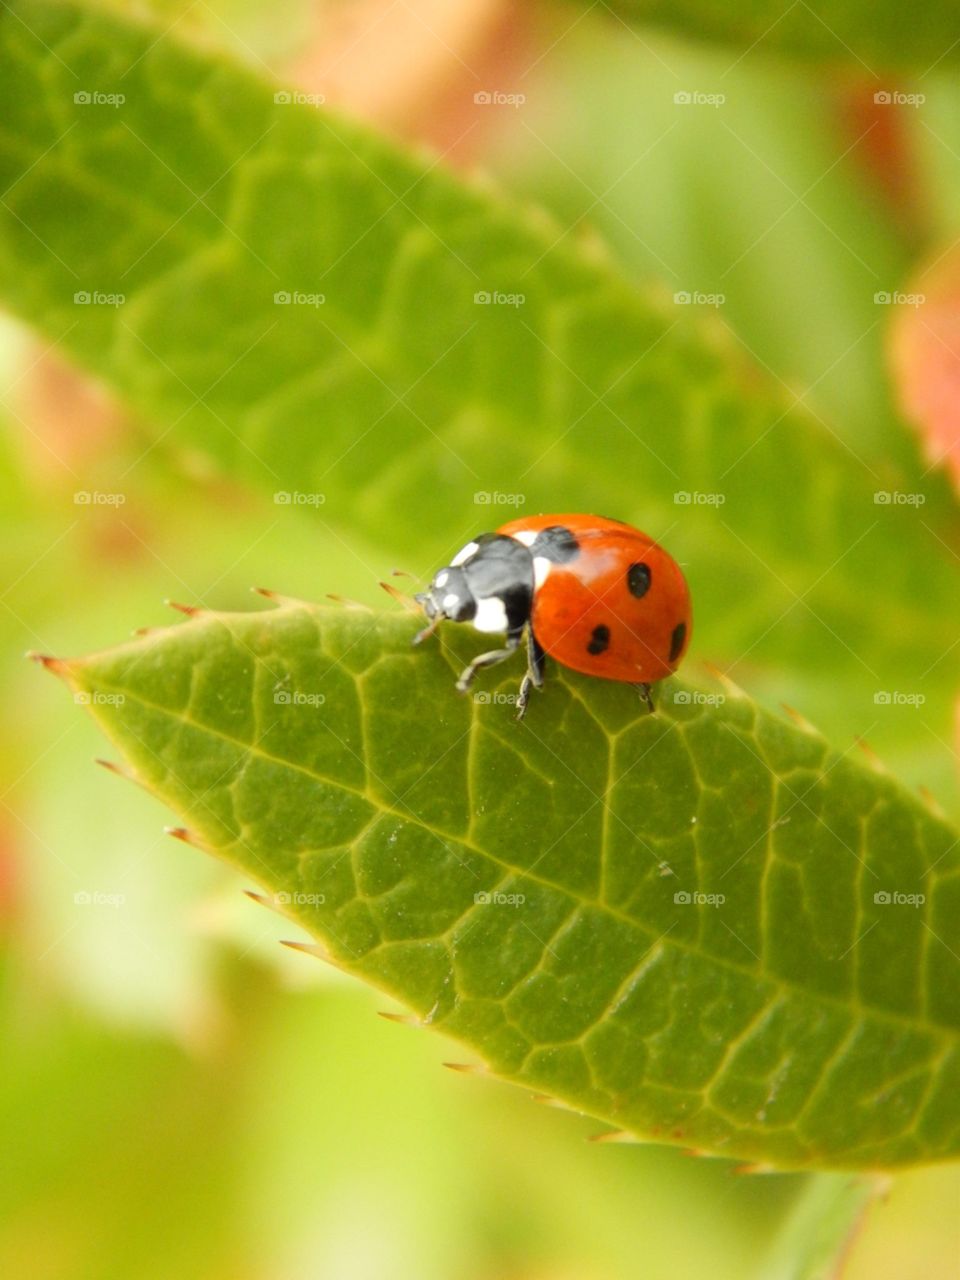 Elegant Lady. The colors of the ladybug bounced off the spring green leaf so beautifully. 